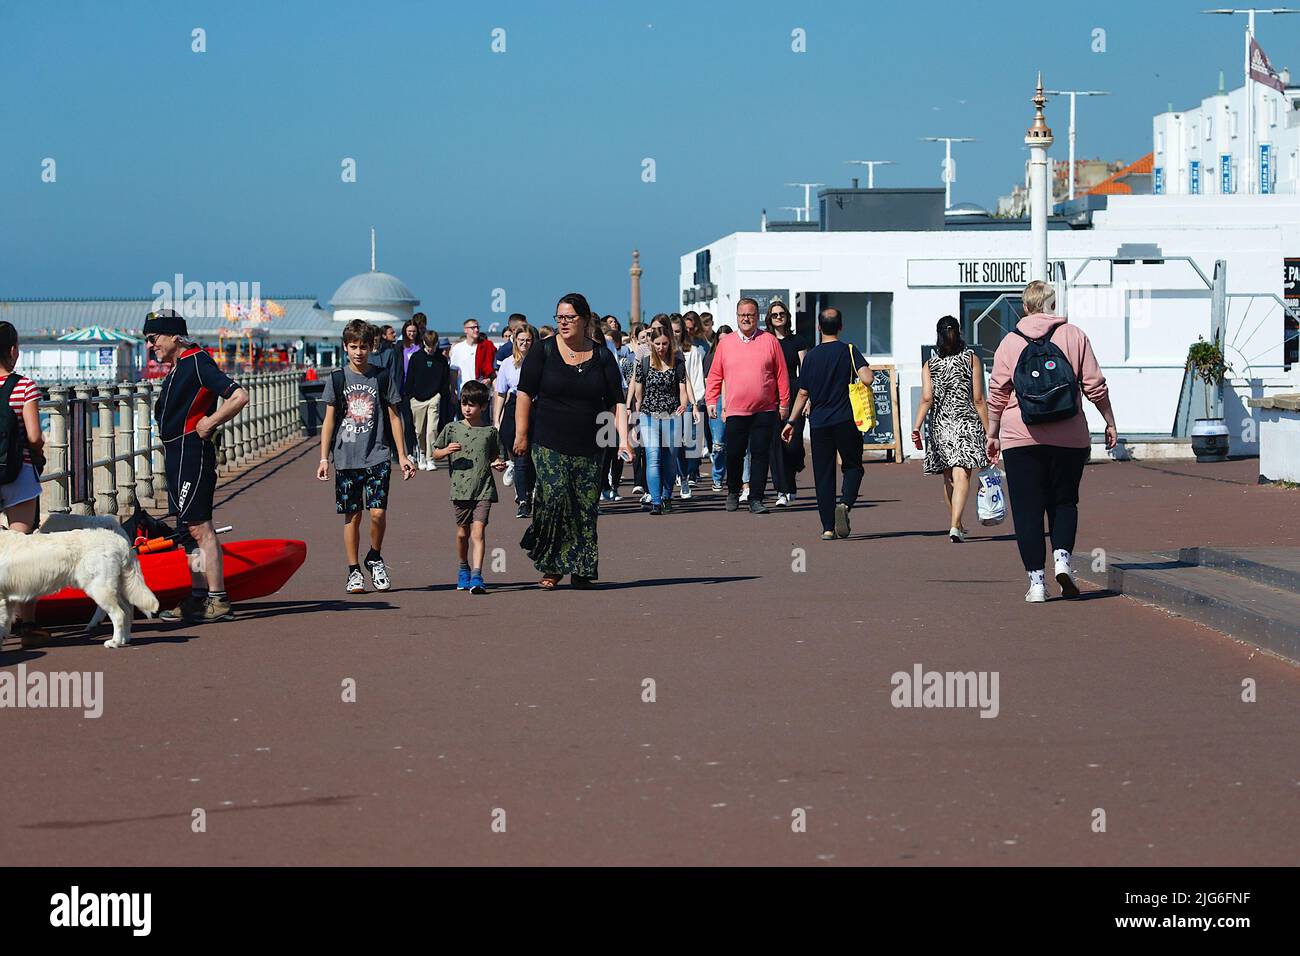 Hastings, East Sussex, UK. 08 Jul, 2022. UK Weather: Very hot and sunny at the seaside town of Hastings in East Sussex as Brits enjoy the very hot weather today and is expected to reach 29c in some parts of the UK. Busy Hastings promenade with people enjoying the hot weather. Photo Credit: Paul Lawrenson /Alamy Live News Stock Photo